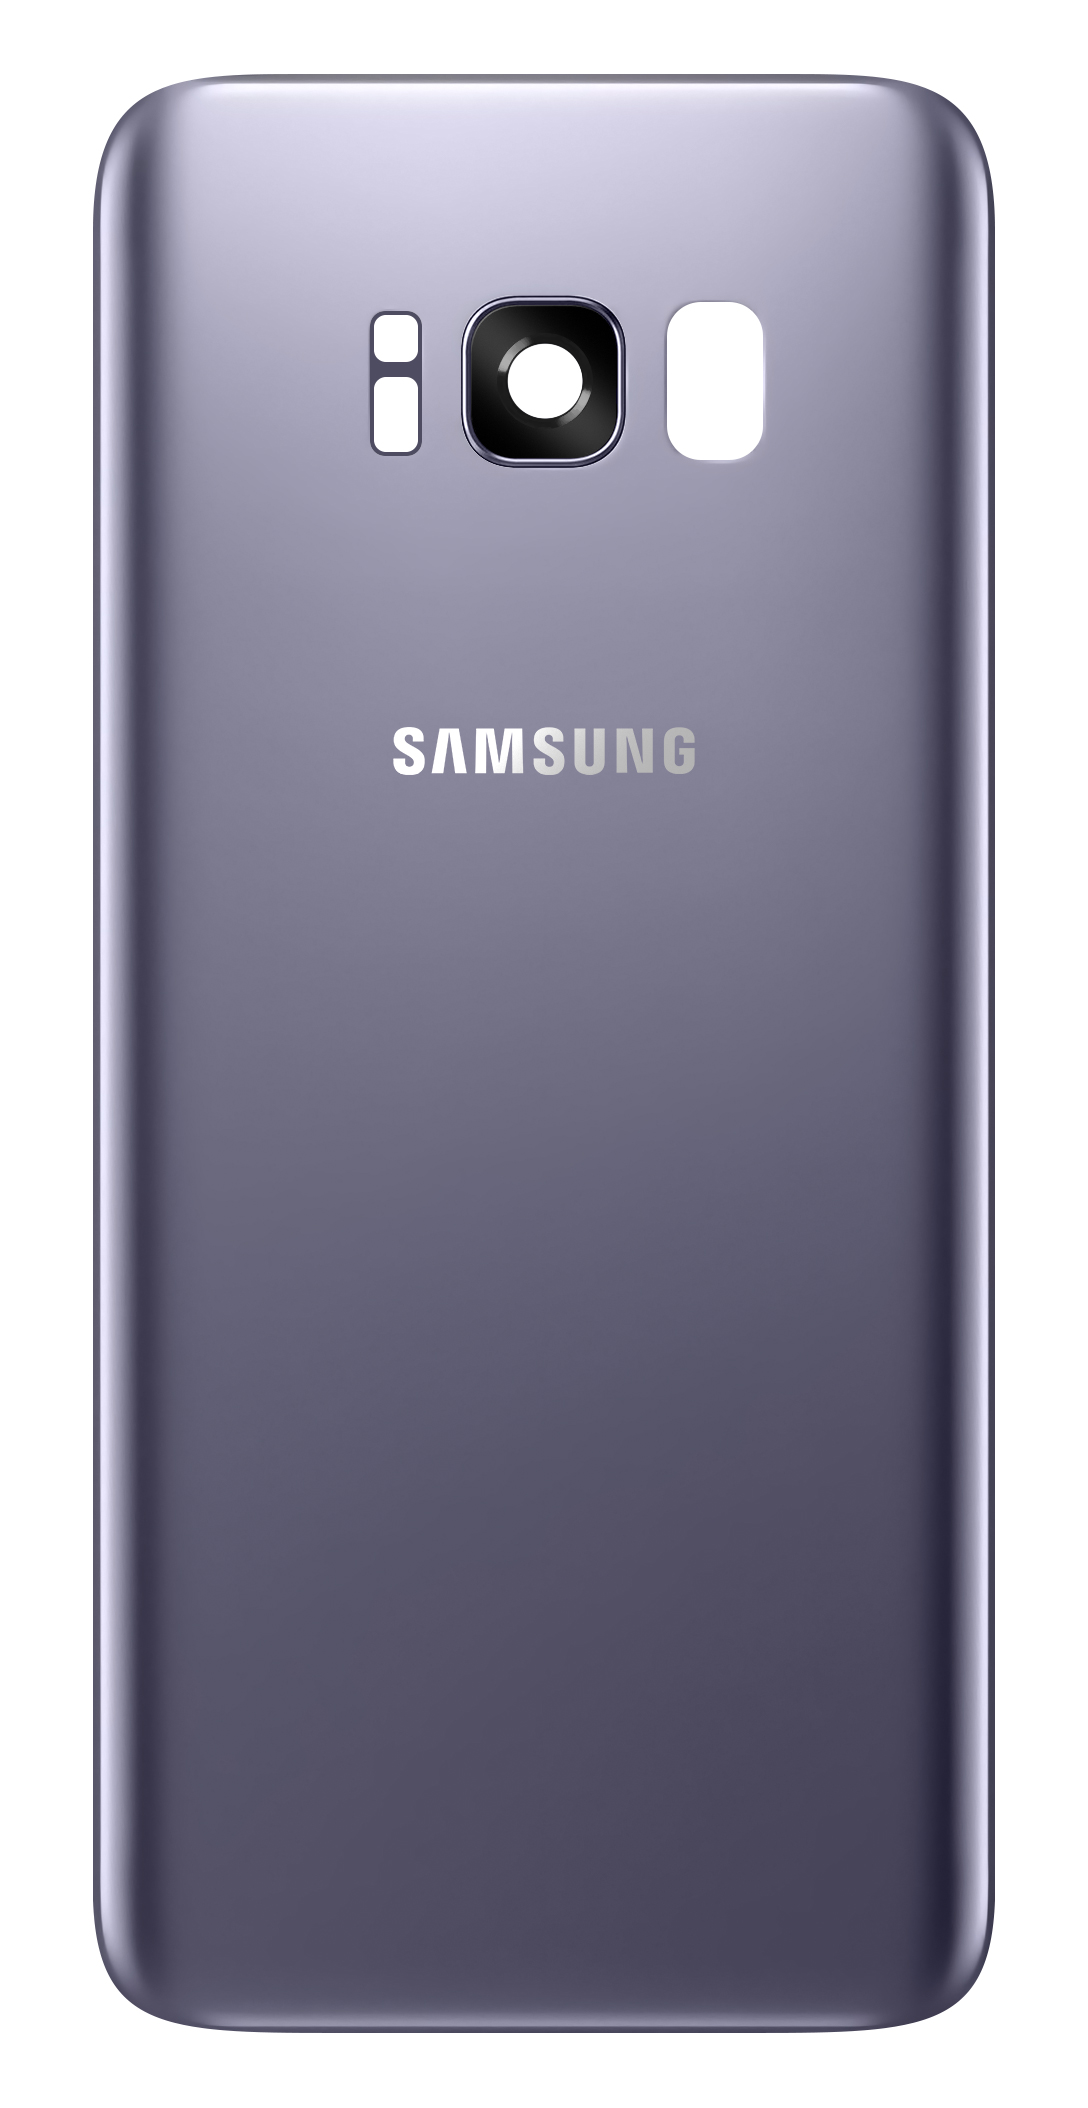 Capac Baterie Samsung Galaxy S8+ G955, Gri (Orchid Gray), Service Pack GH82-14015C 